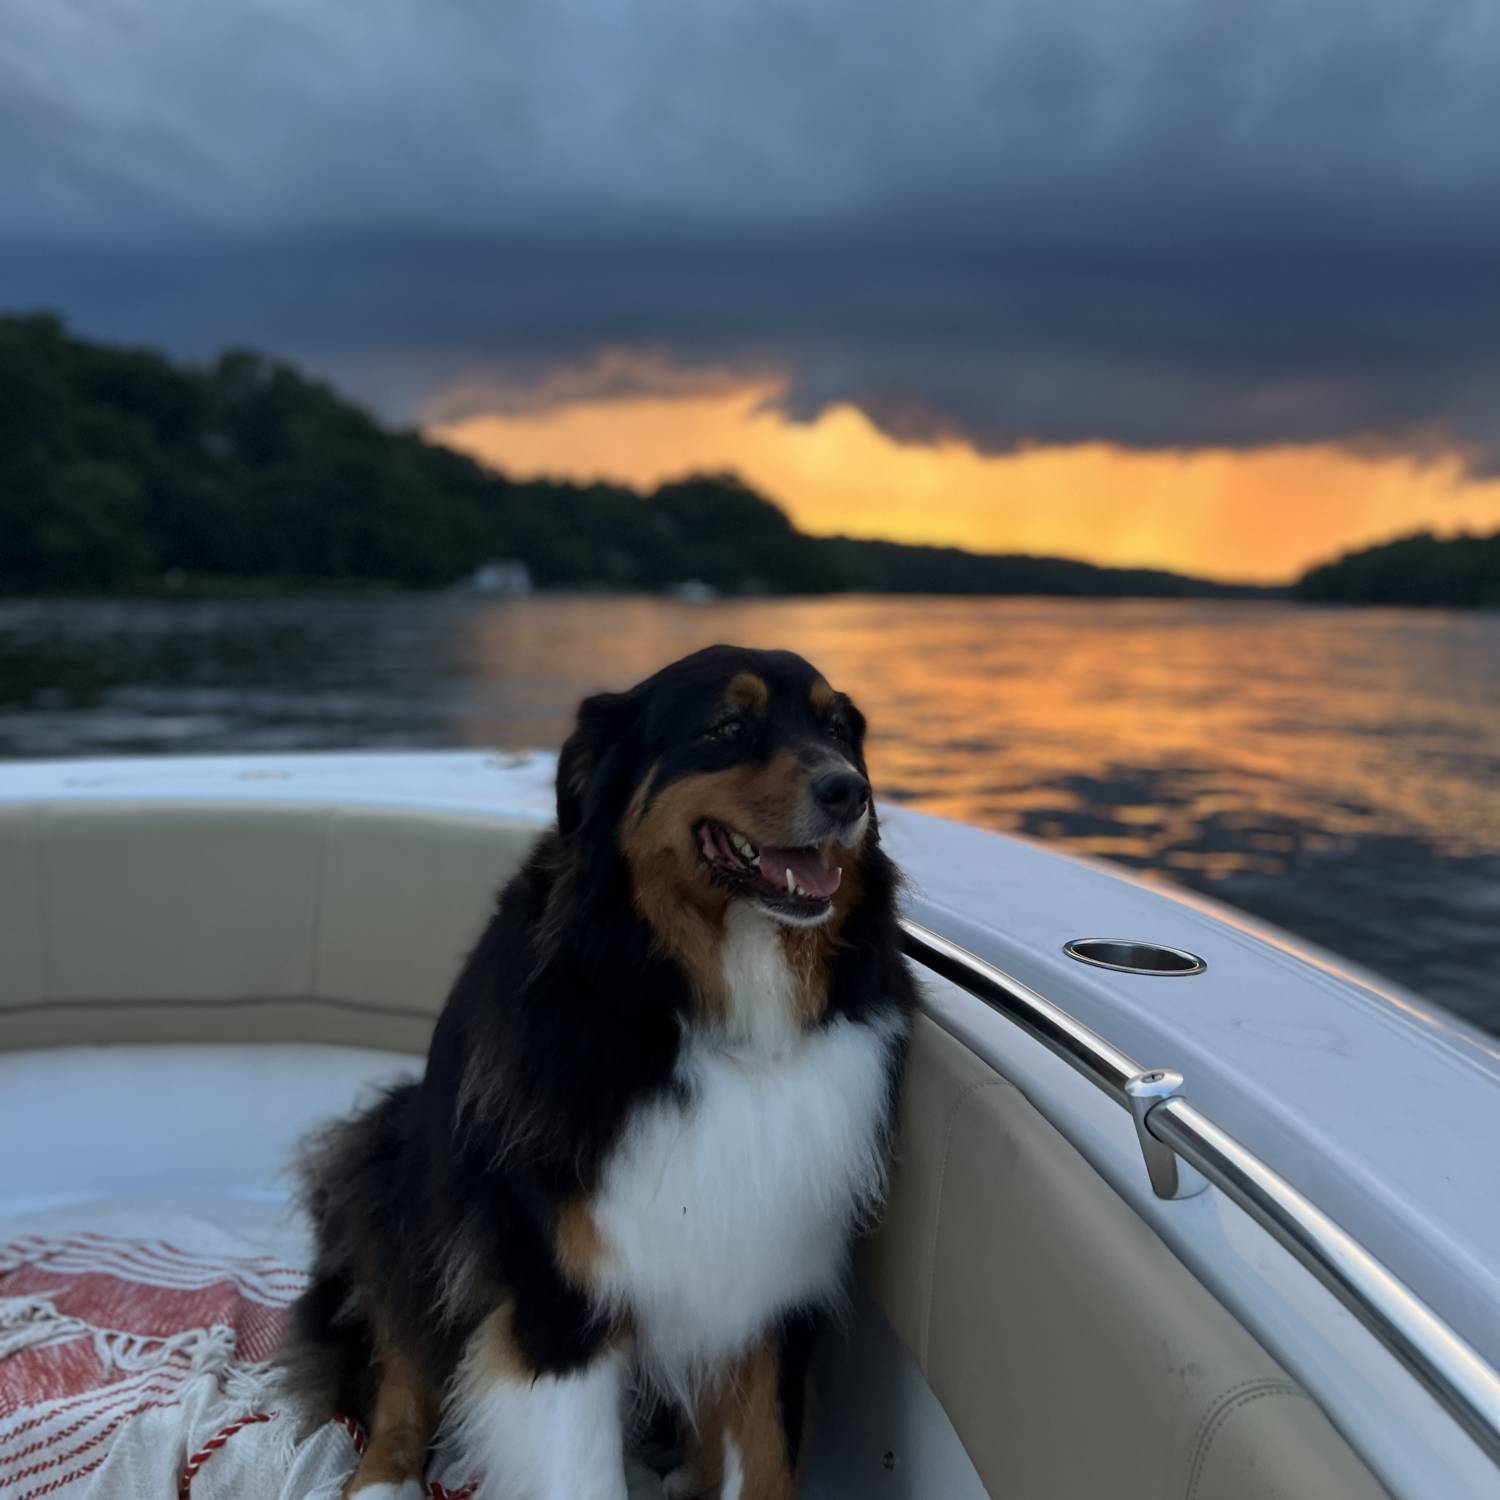 Title: Zeus the First Mate - On board their Sportsman Heritage 231 Center Console - Location: Annapolis, MD. Participating in the Photo Contest #SportsmanSeptember